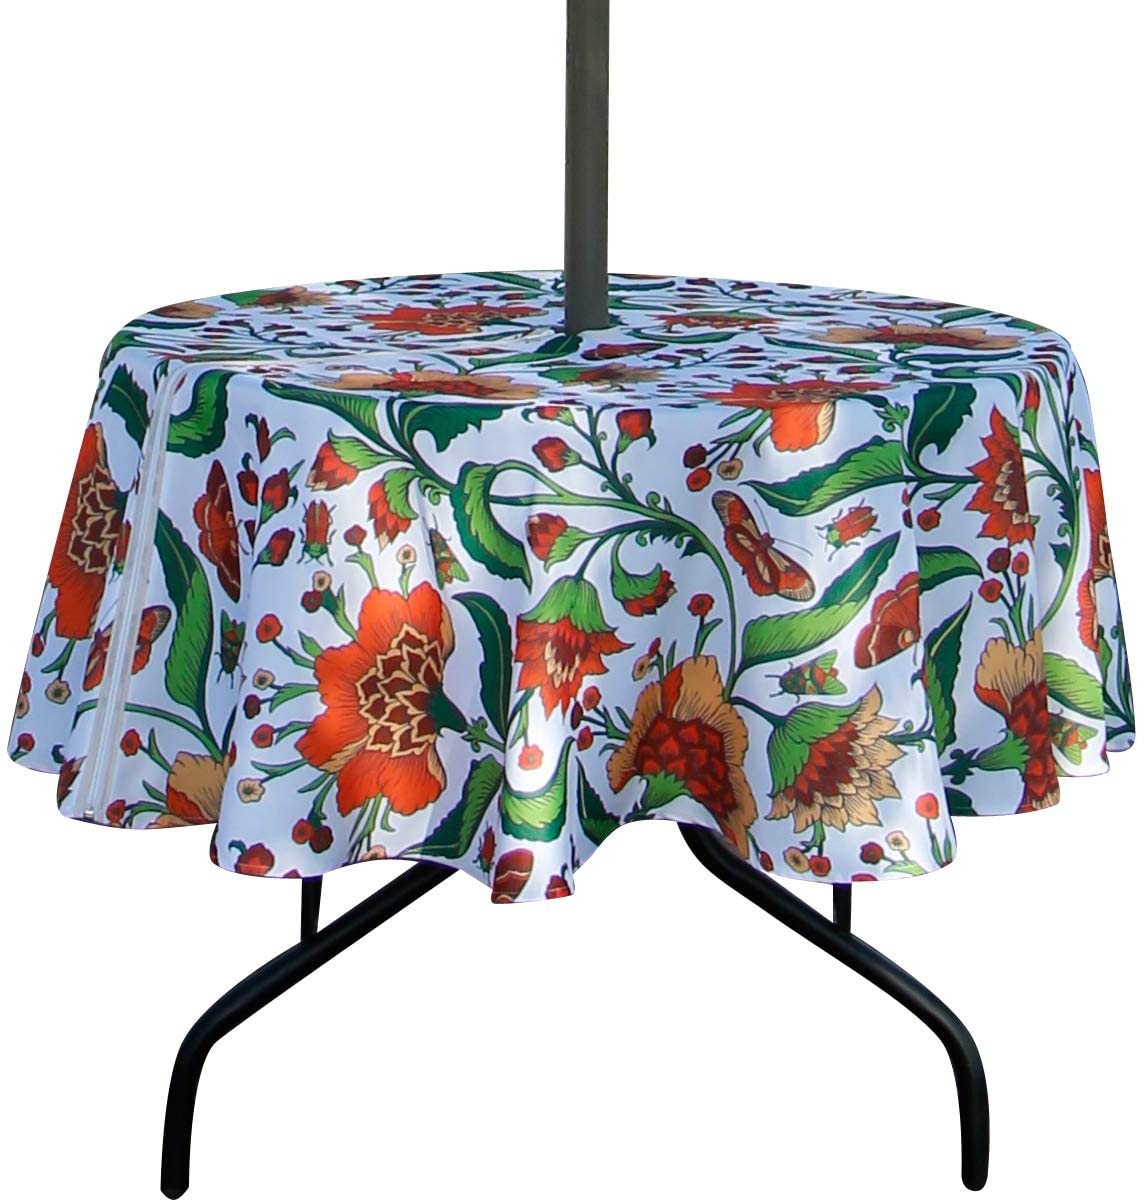 EHouseHome Spillproof Garden Round Tablecloth With Umbrella Hole